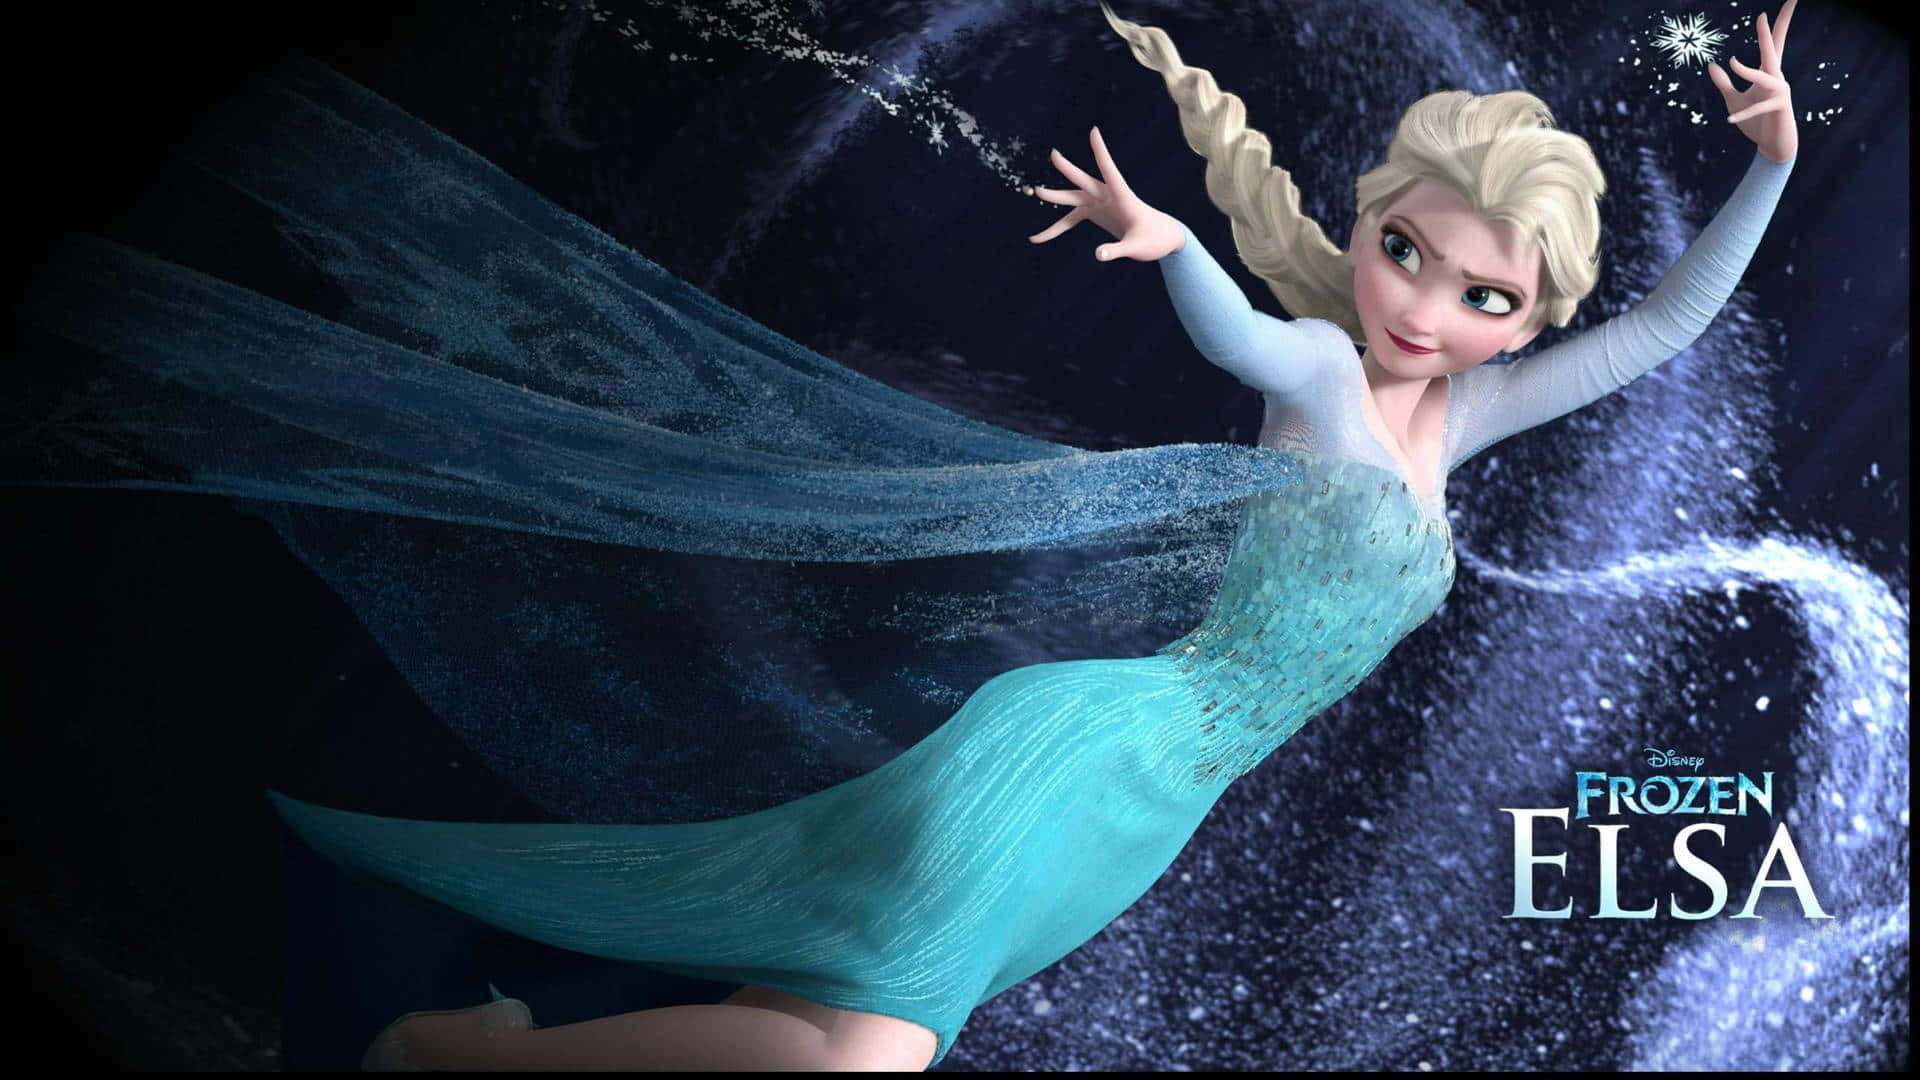 Queen Elsa of Arendelle reigning with her magical power